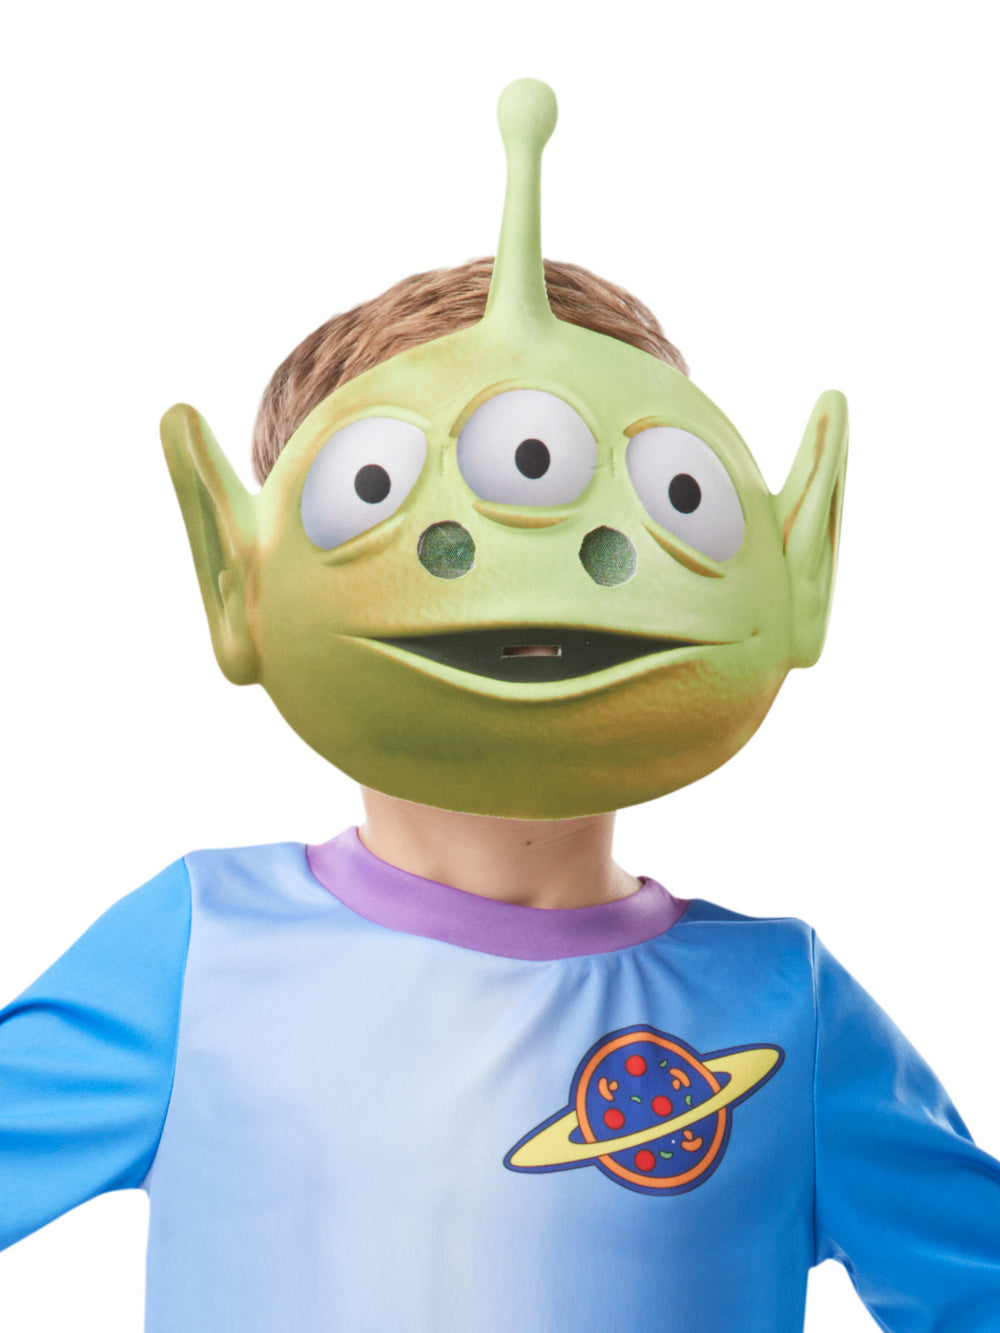 ALIEN TOY STORY 4 COSTUME, CHILD - Little Shop of Horrors